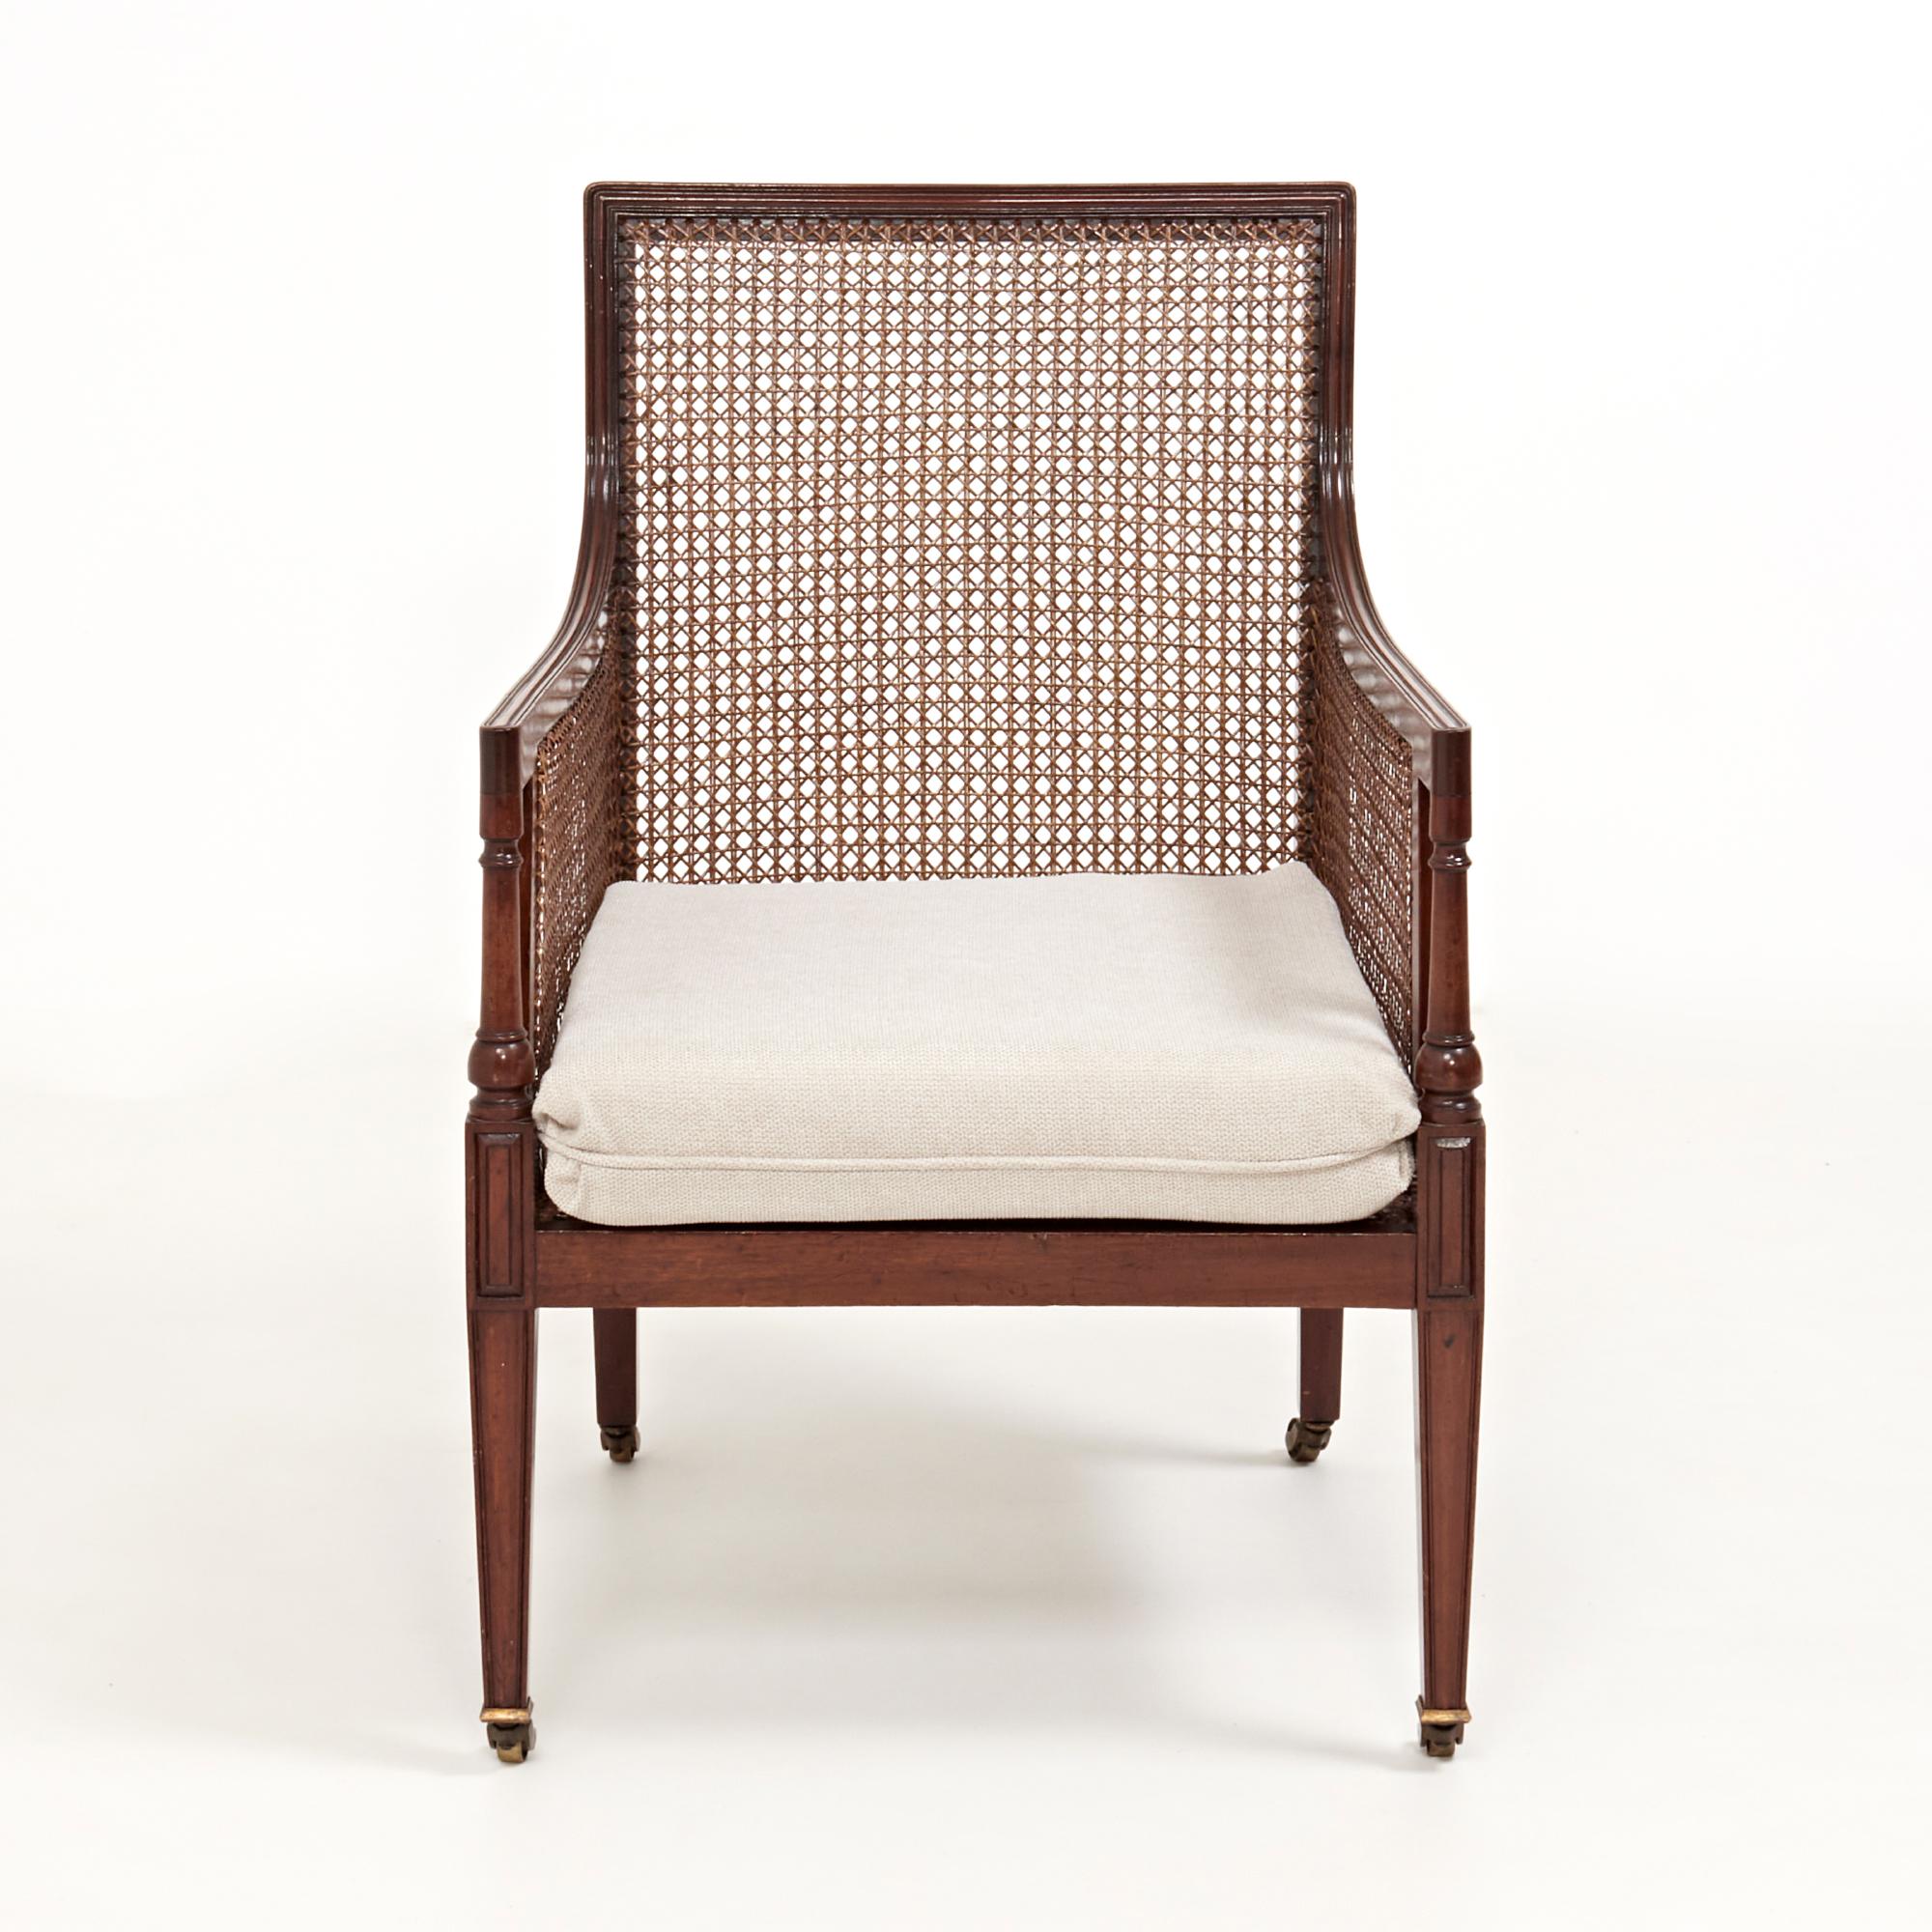 A stunning bergère mahogany Gentleman’s library chair.

Featuring the original caning on the backrests and arms with the seat cushions newly reupholstered in soft grey fabric for the ultimate comfort.

The legs of the chair feature unique